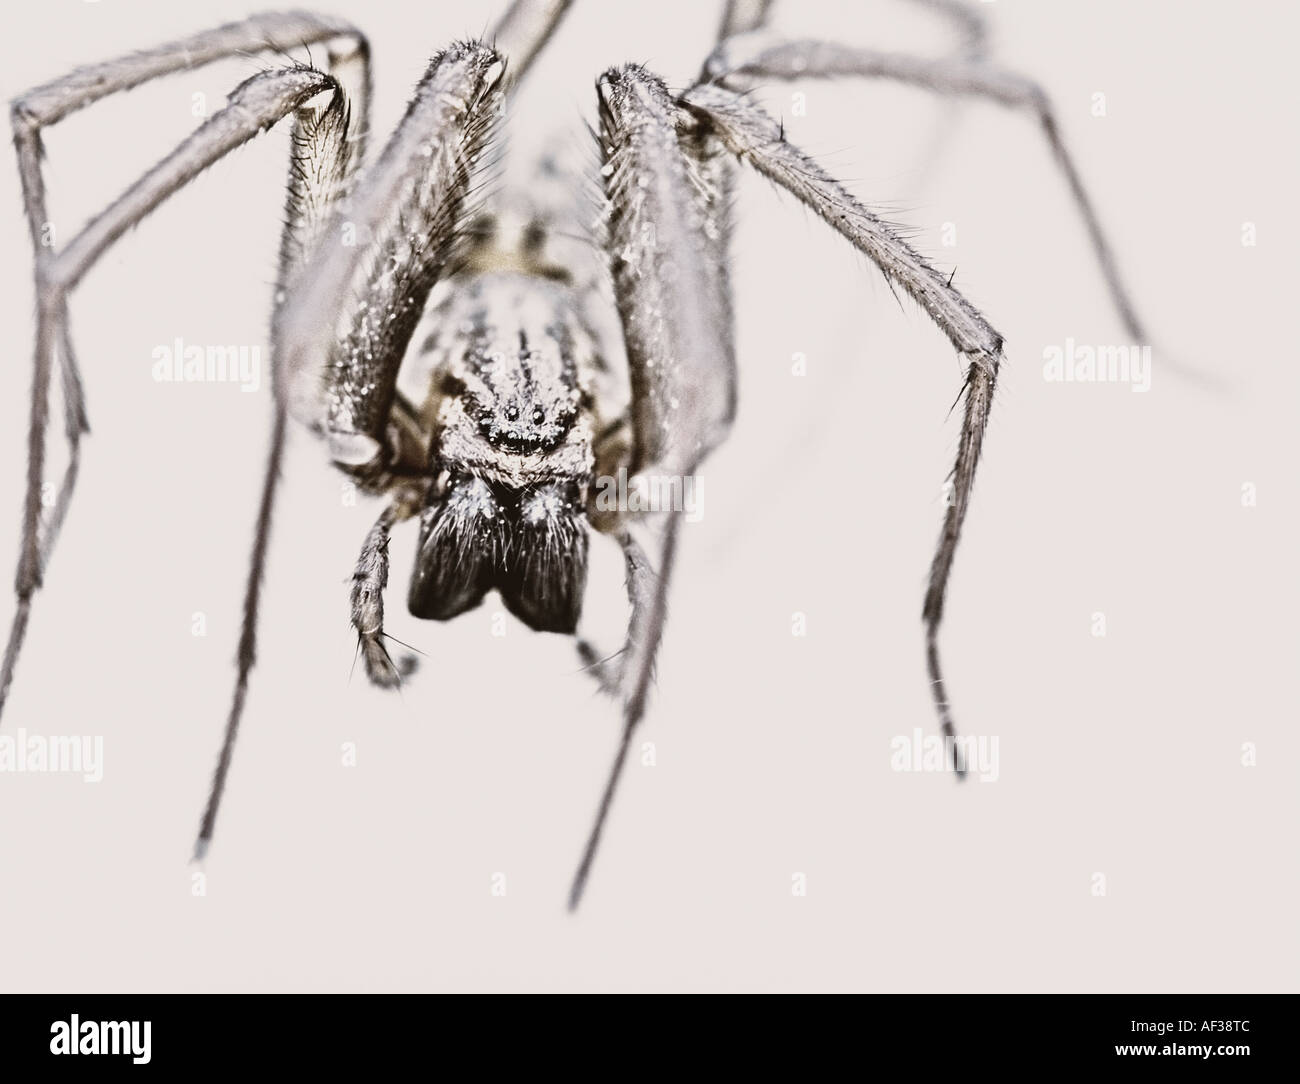 A front abstract view of a spider with legs and large fangs. Stock Photo